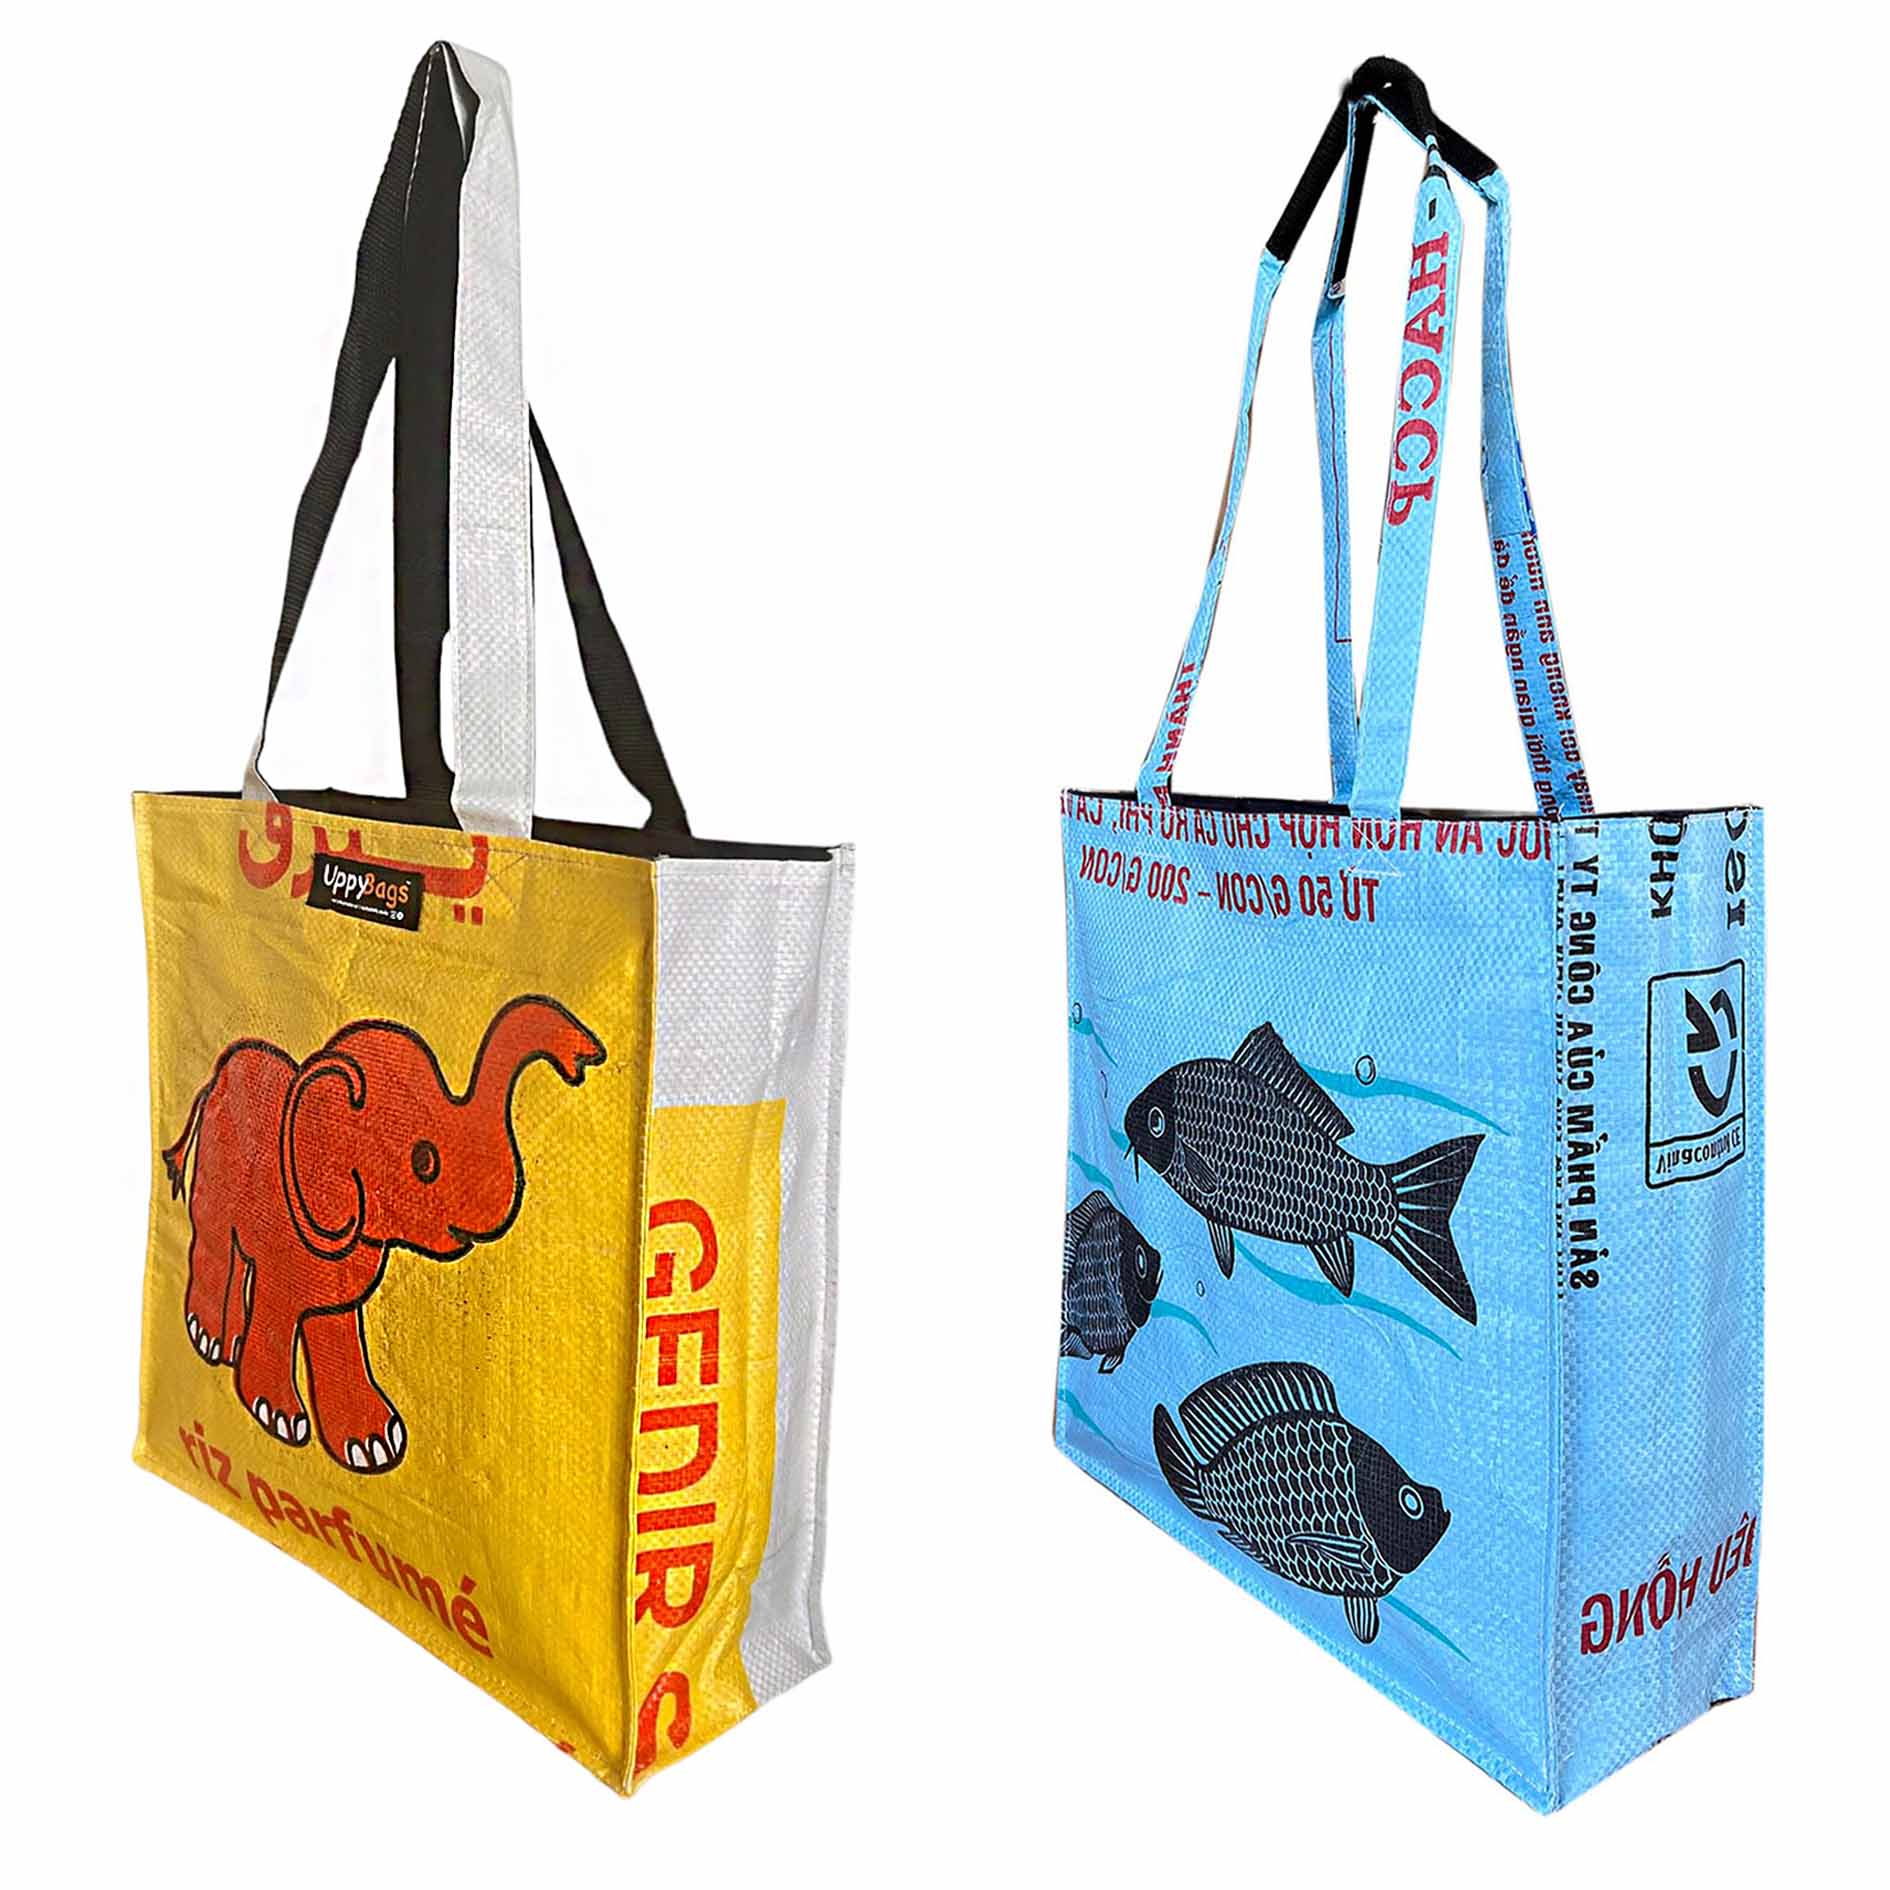 Recycled material tote bags with animal prints